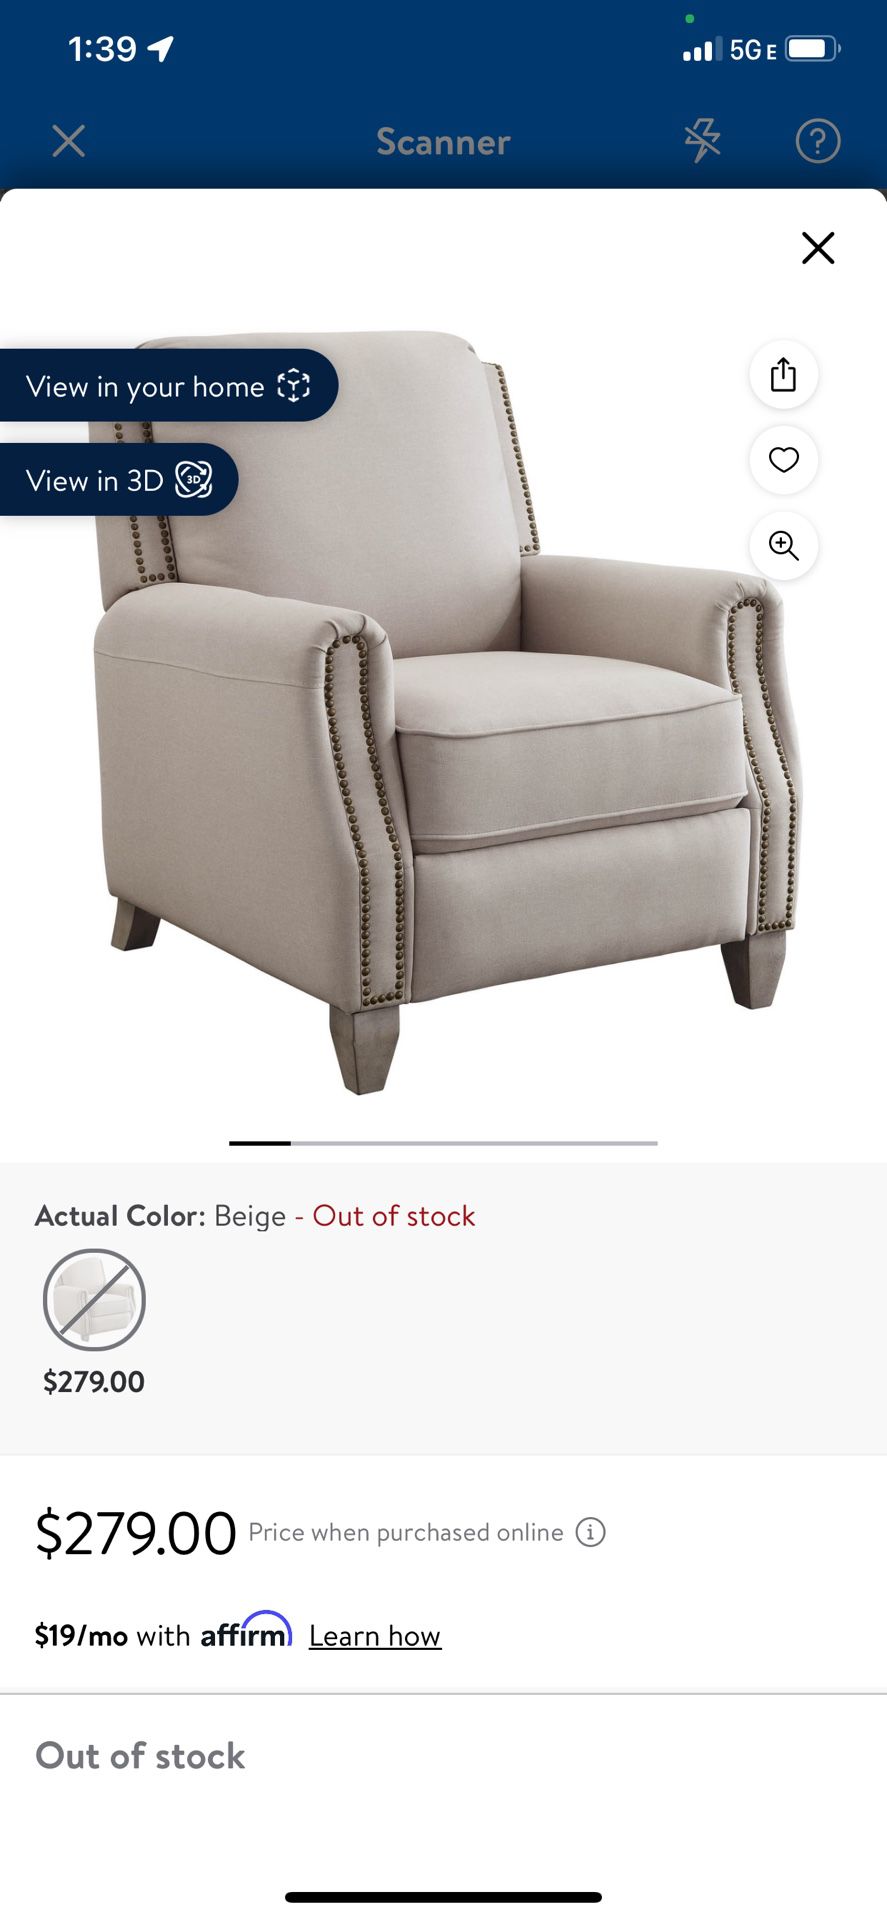 Better Homes and Gardens Pushback Recliner, Taupe Fabric Upholstery